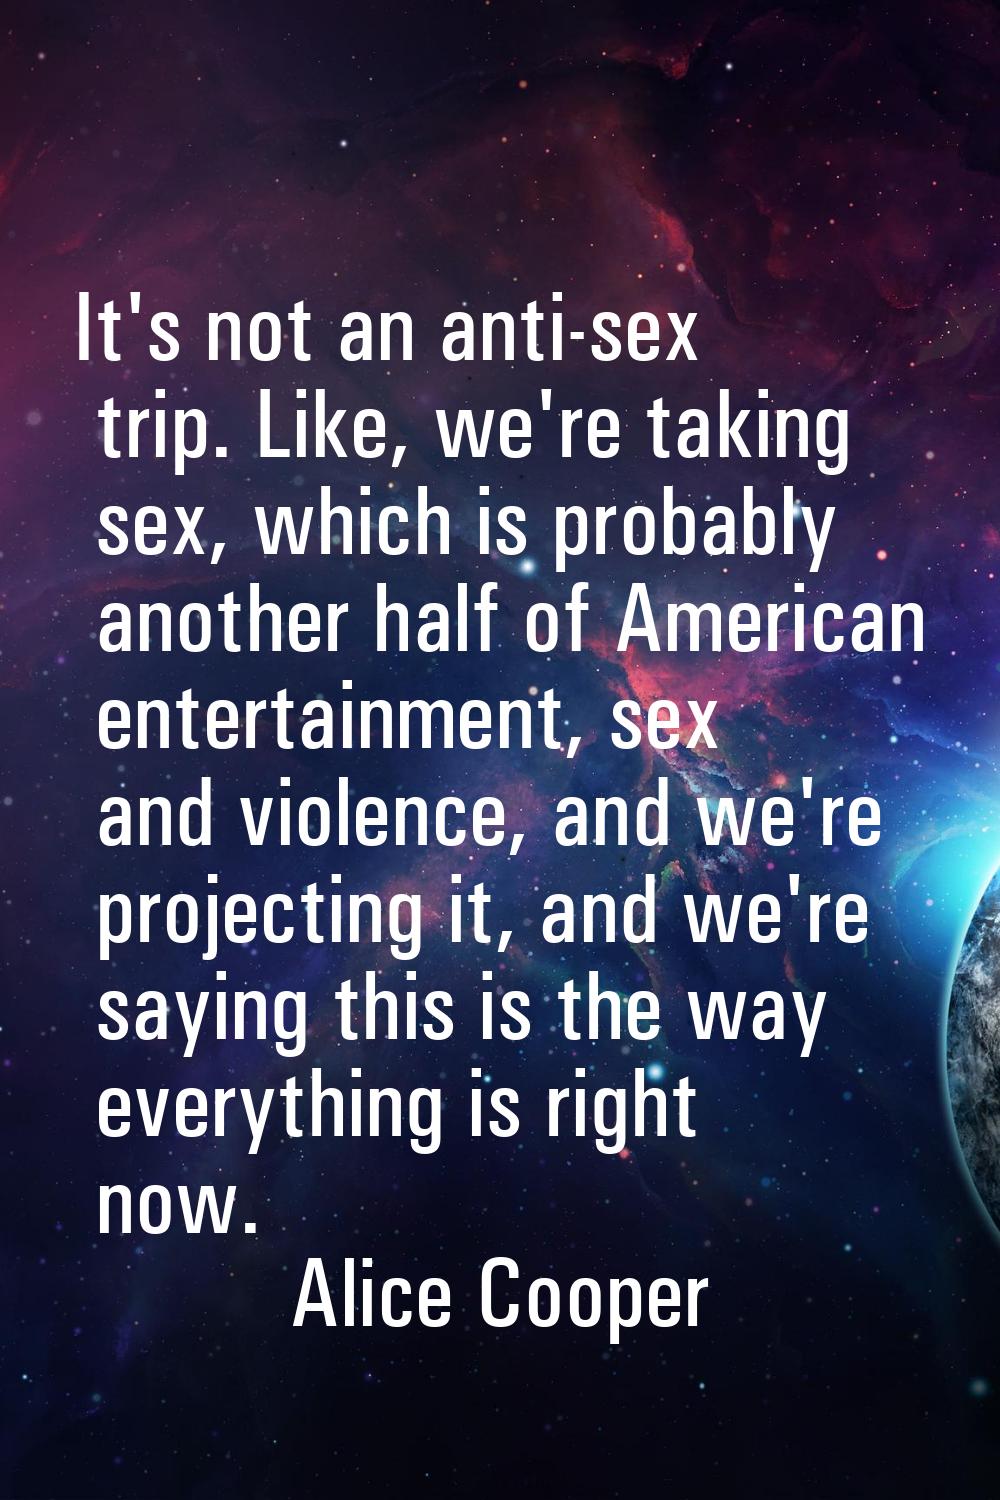 It's not an anti-sex trip. Like, we're taking sex, which is probably another half of American enter